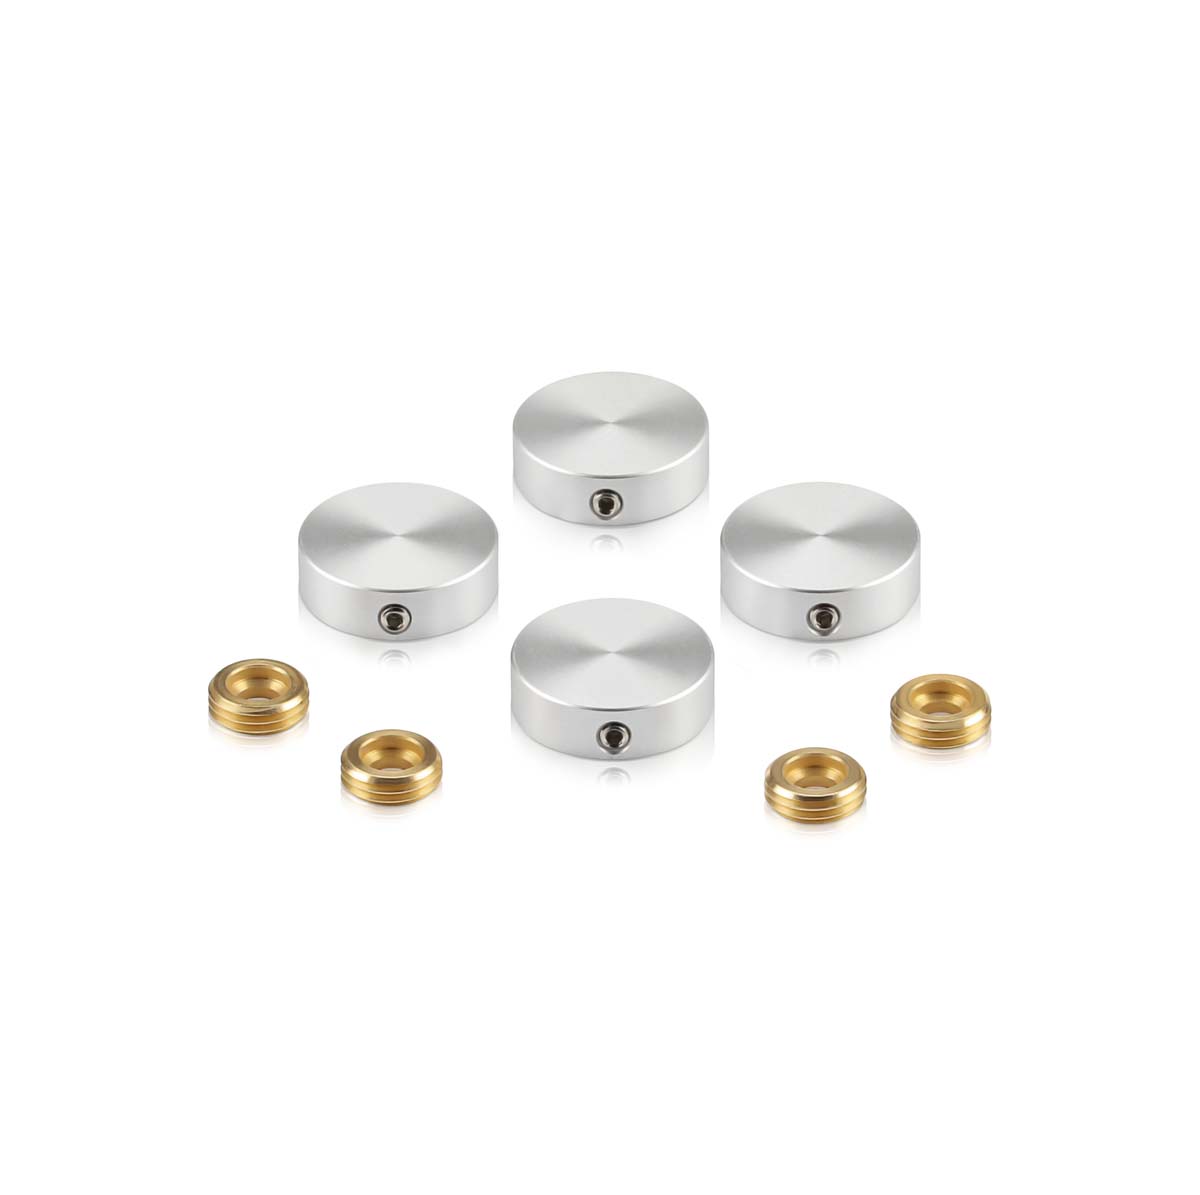 Set of 4 Locking Screw Cover, Diameter: 13/16'' (3/4''), Aluminum Clear Anodized Finish, (Indoor or Outdoor Use)